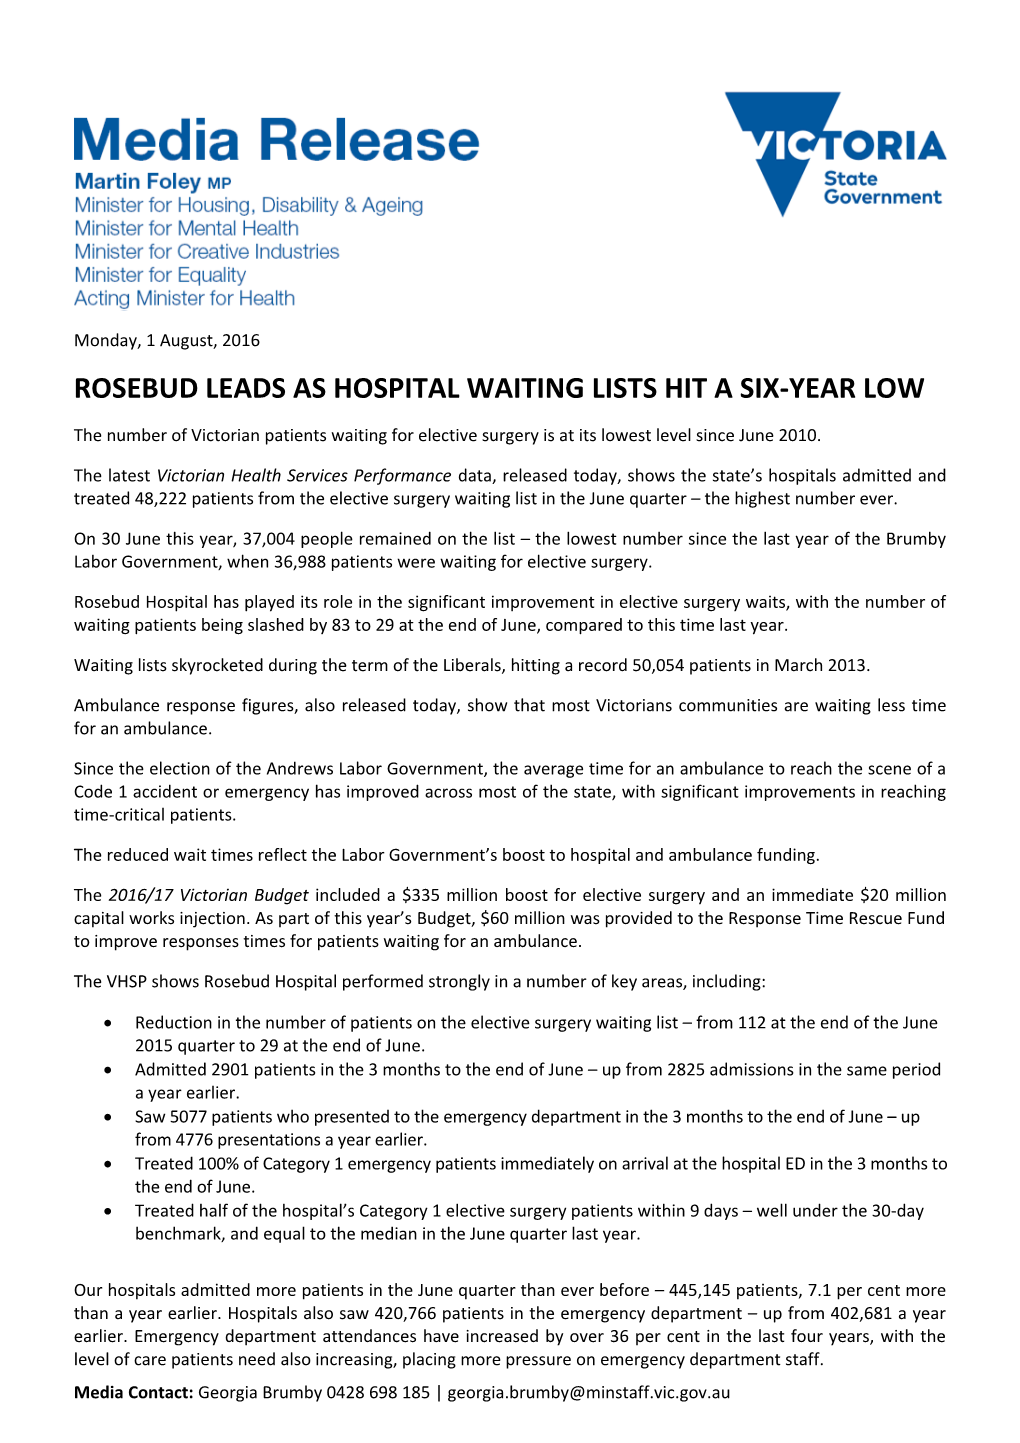 Rosebud Leads As Hospital Waiting Lists Hit a Six-Year Low